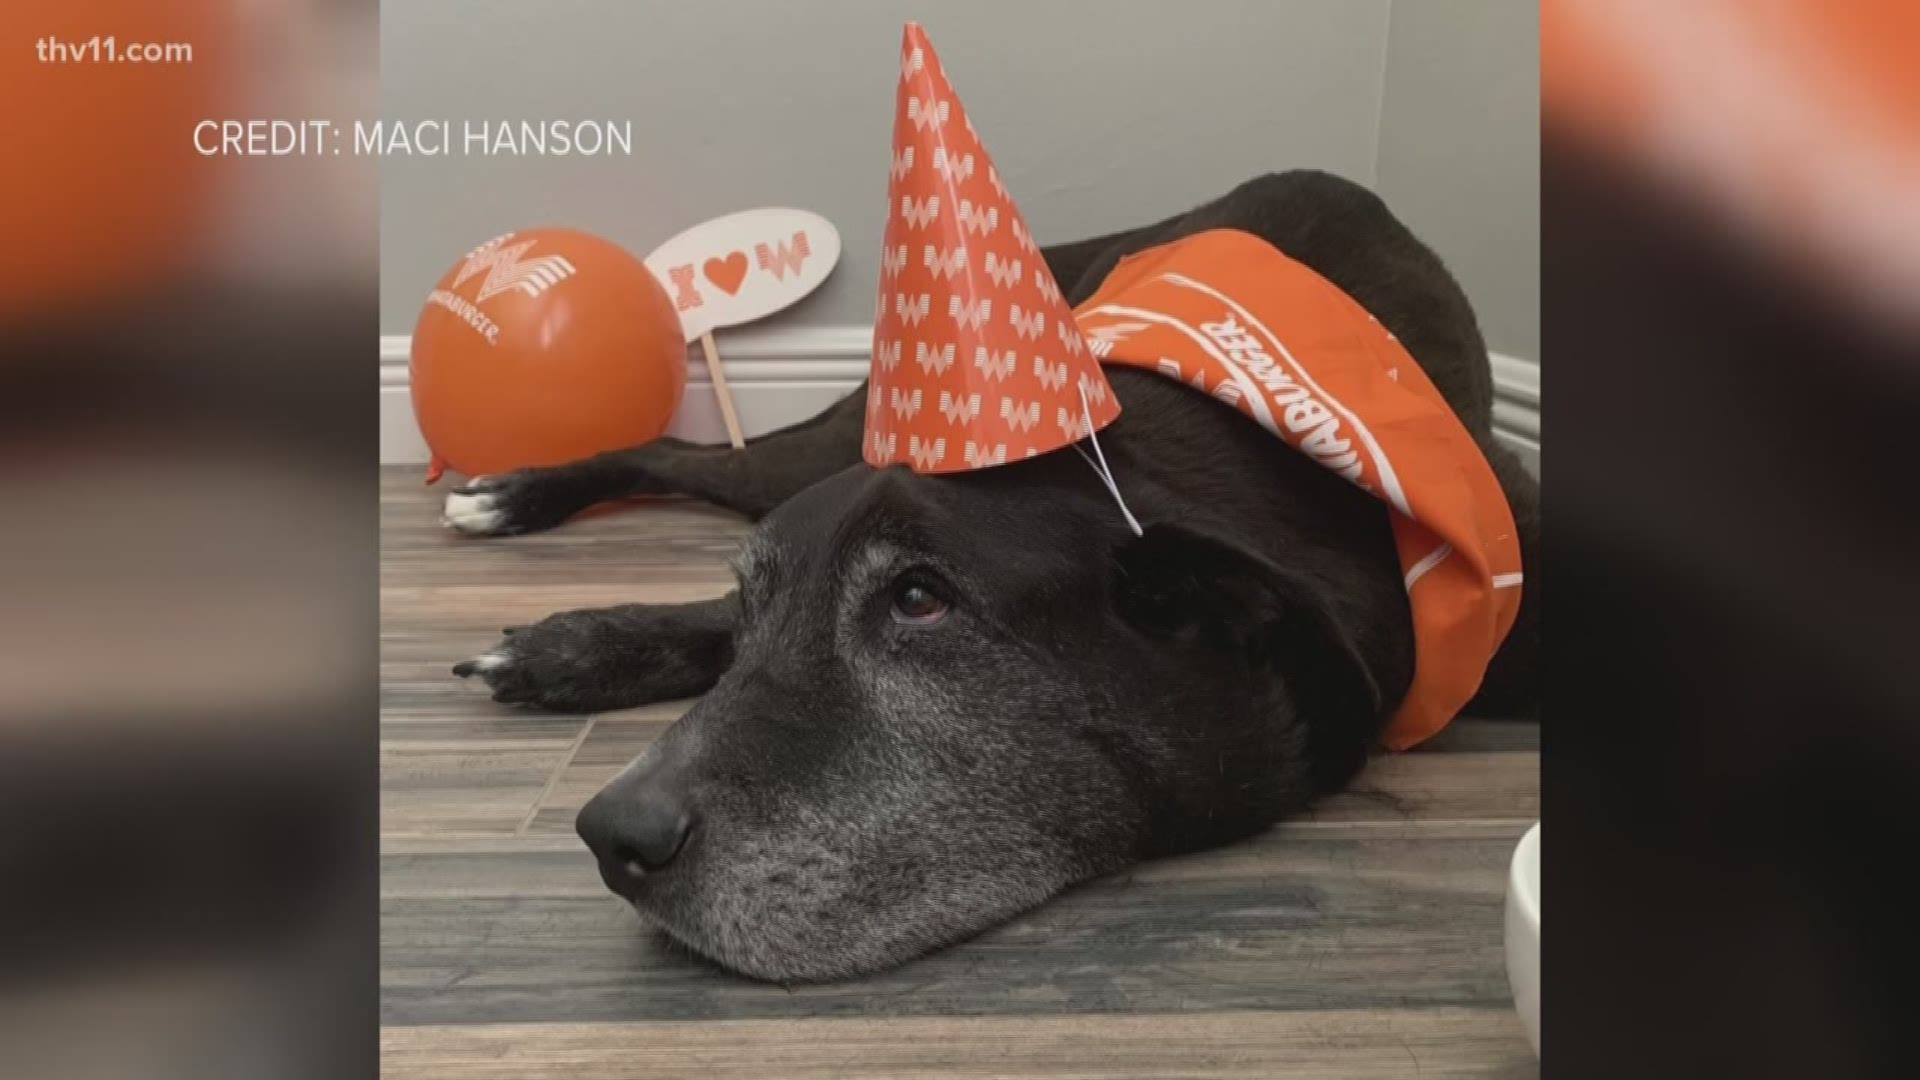 Whataburger threw a party for a sick dog in his final days. A tweet went viral after an Arkansas family from Little Rock asked Whataburger to throw a Whata-themed party for their sick dog.